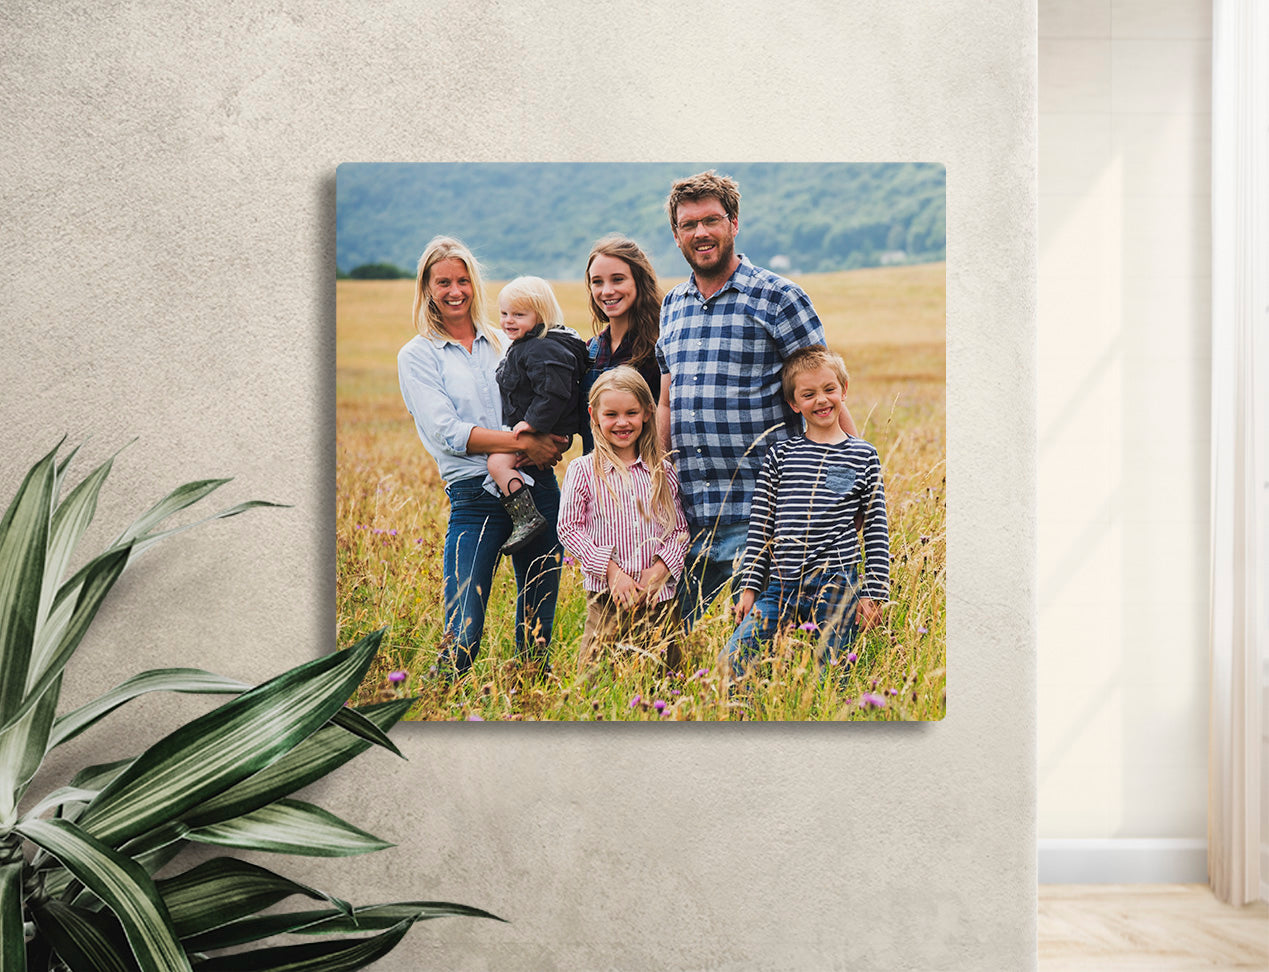 Square Metal Print with family image